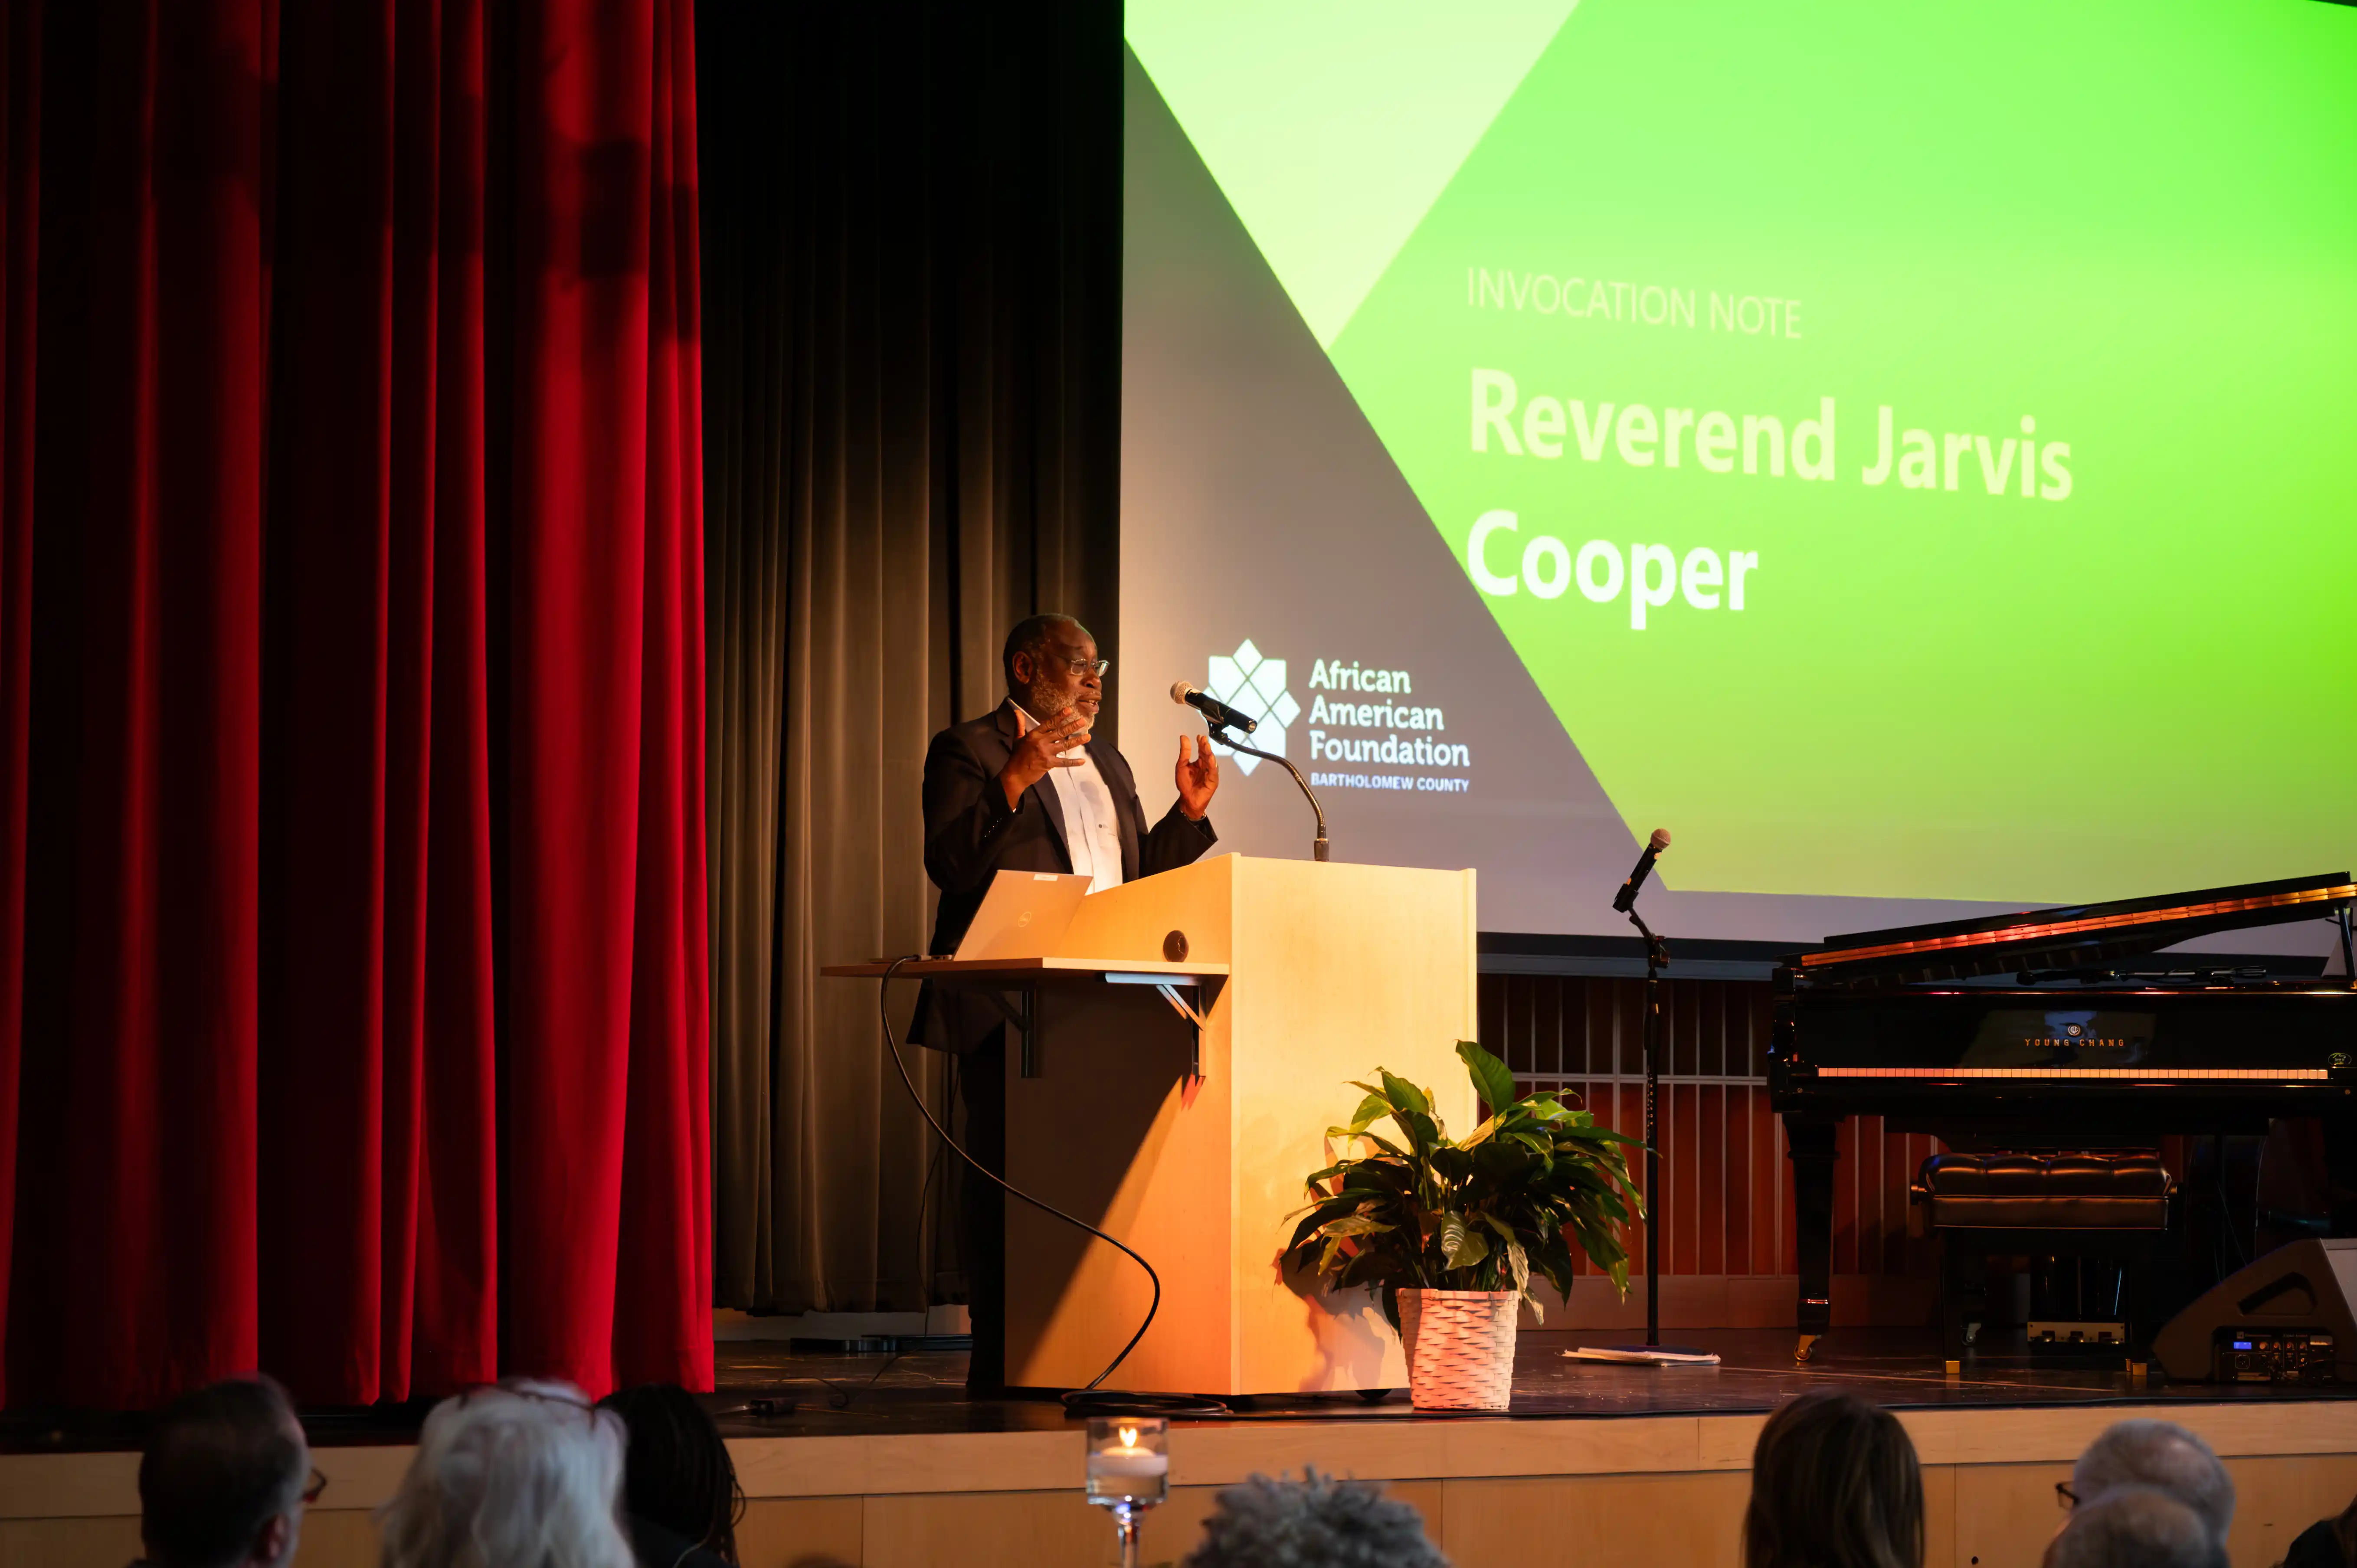 Person speaking at a podium with a projection screen in the background displaying "Reverend Jarvis Cooper" at an event.